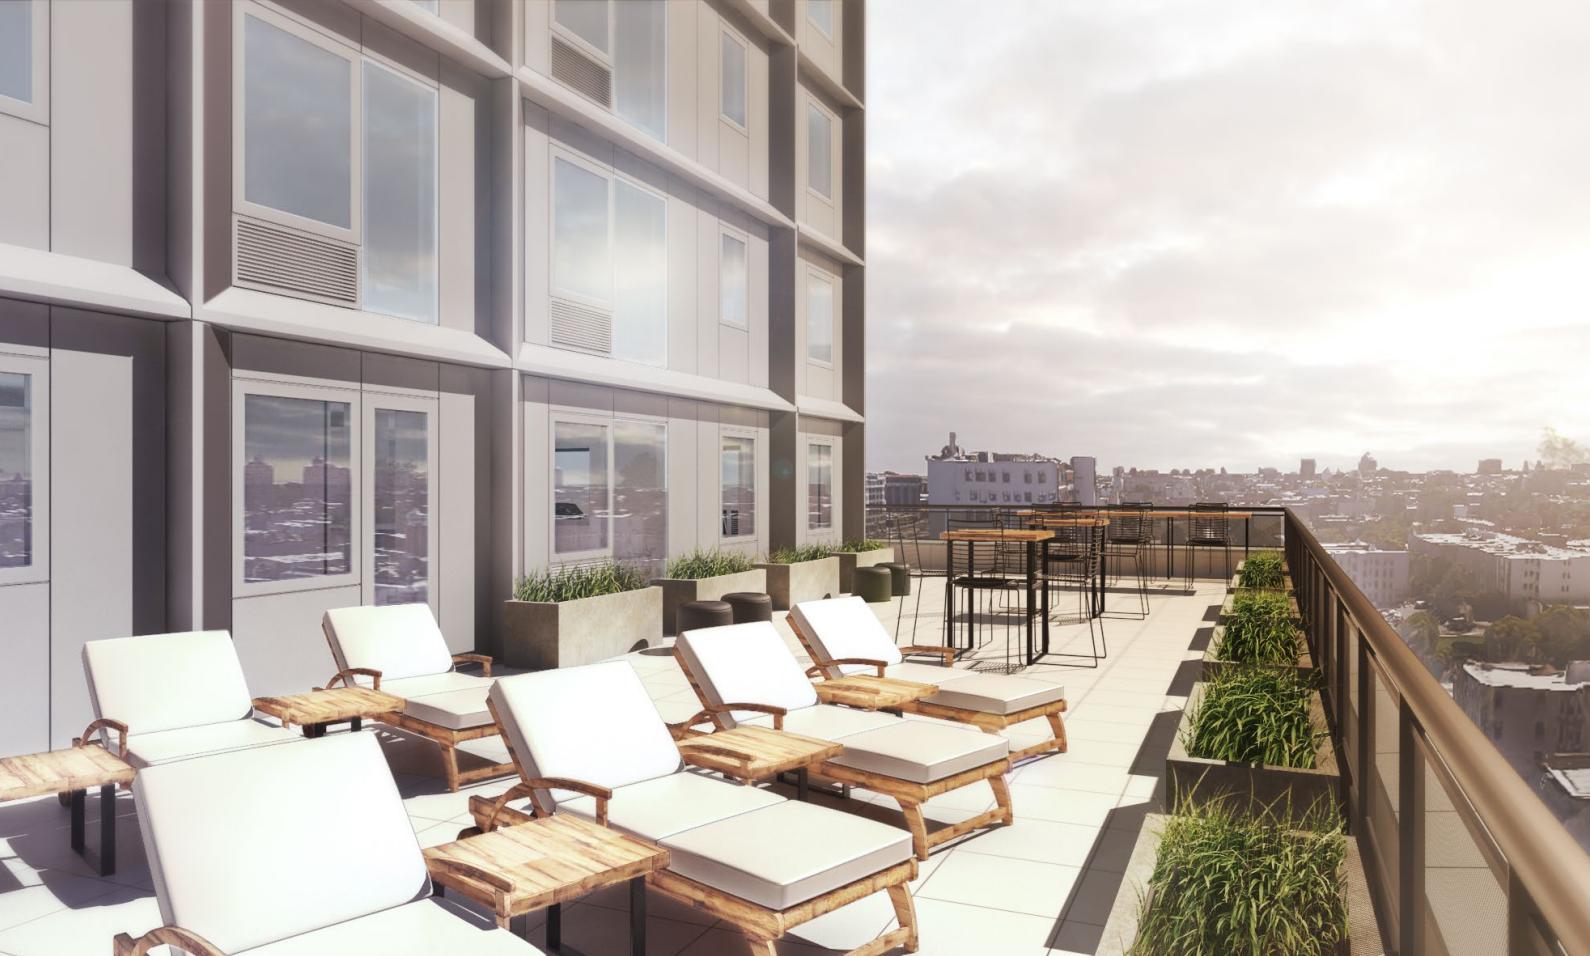 Roof deck at 38 Sixth Avenue, rendering by SHoP Architects